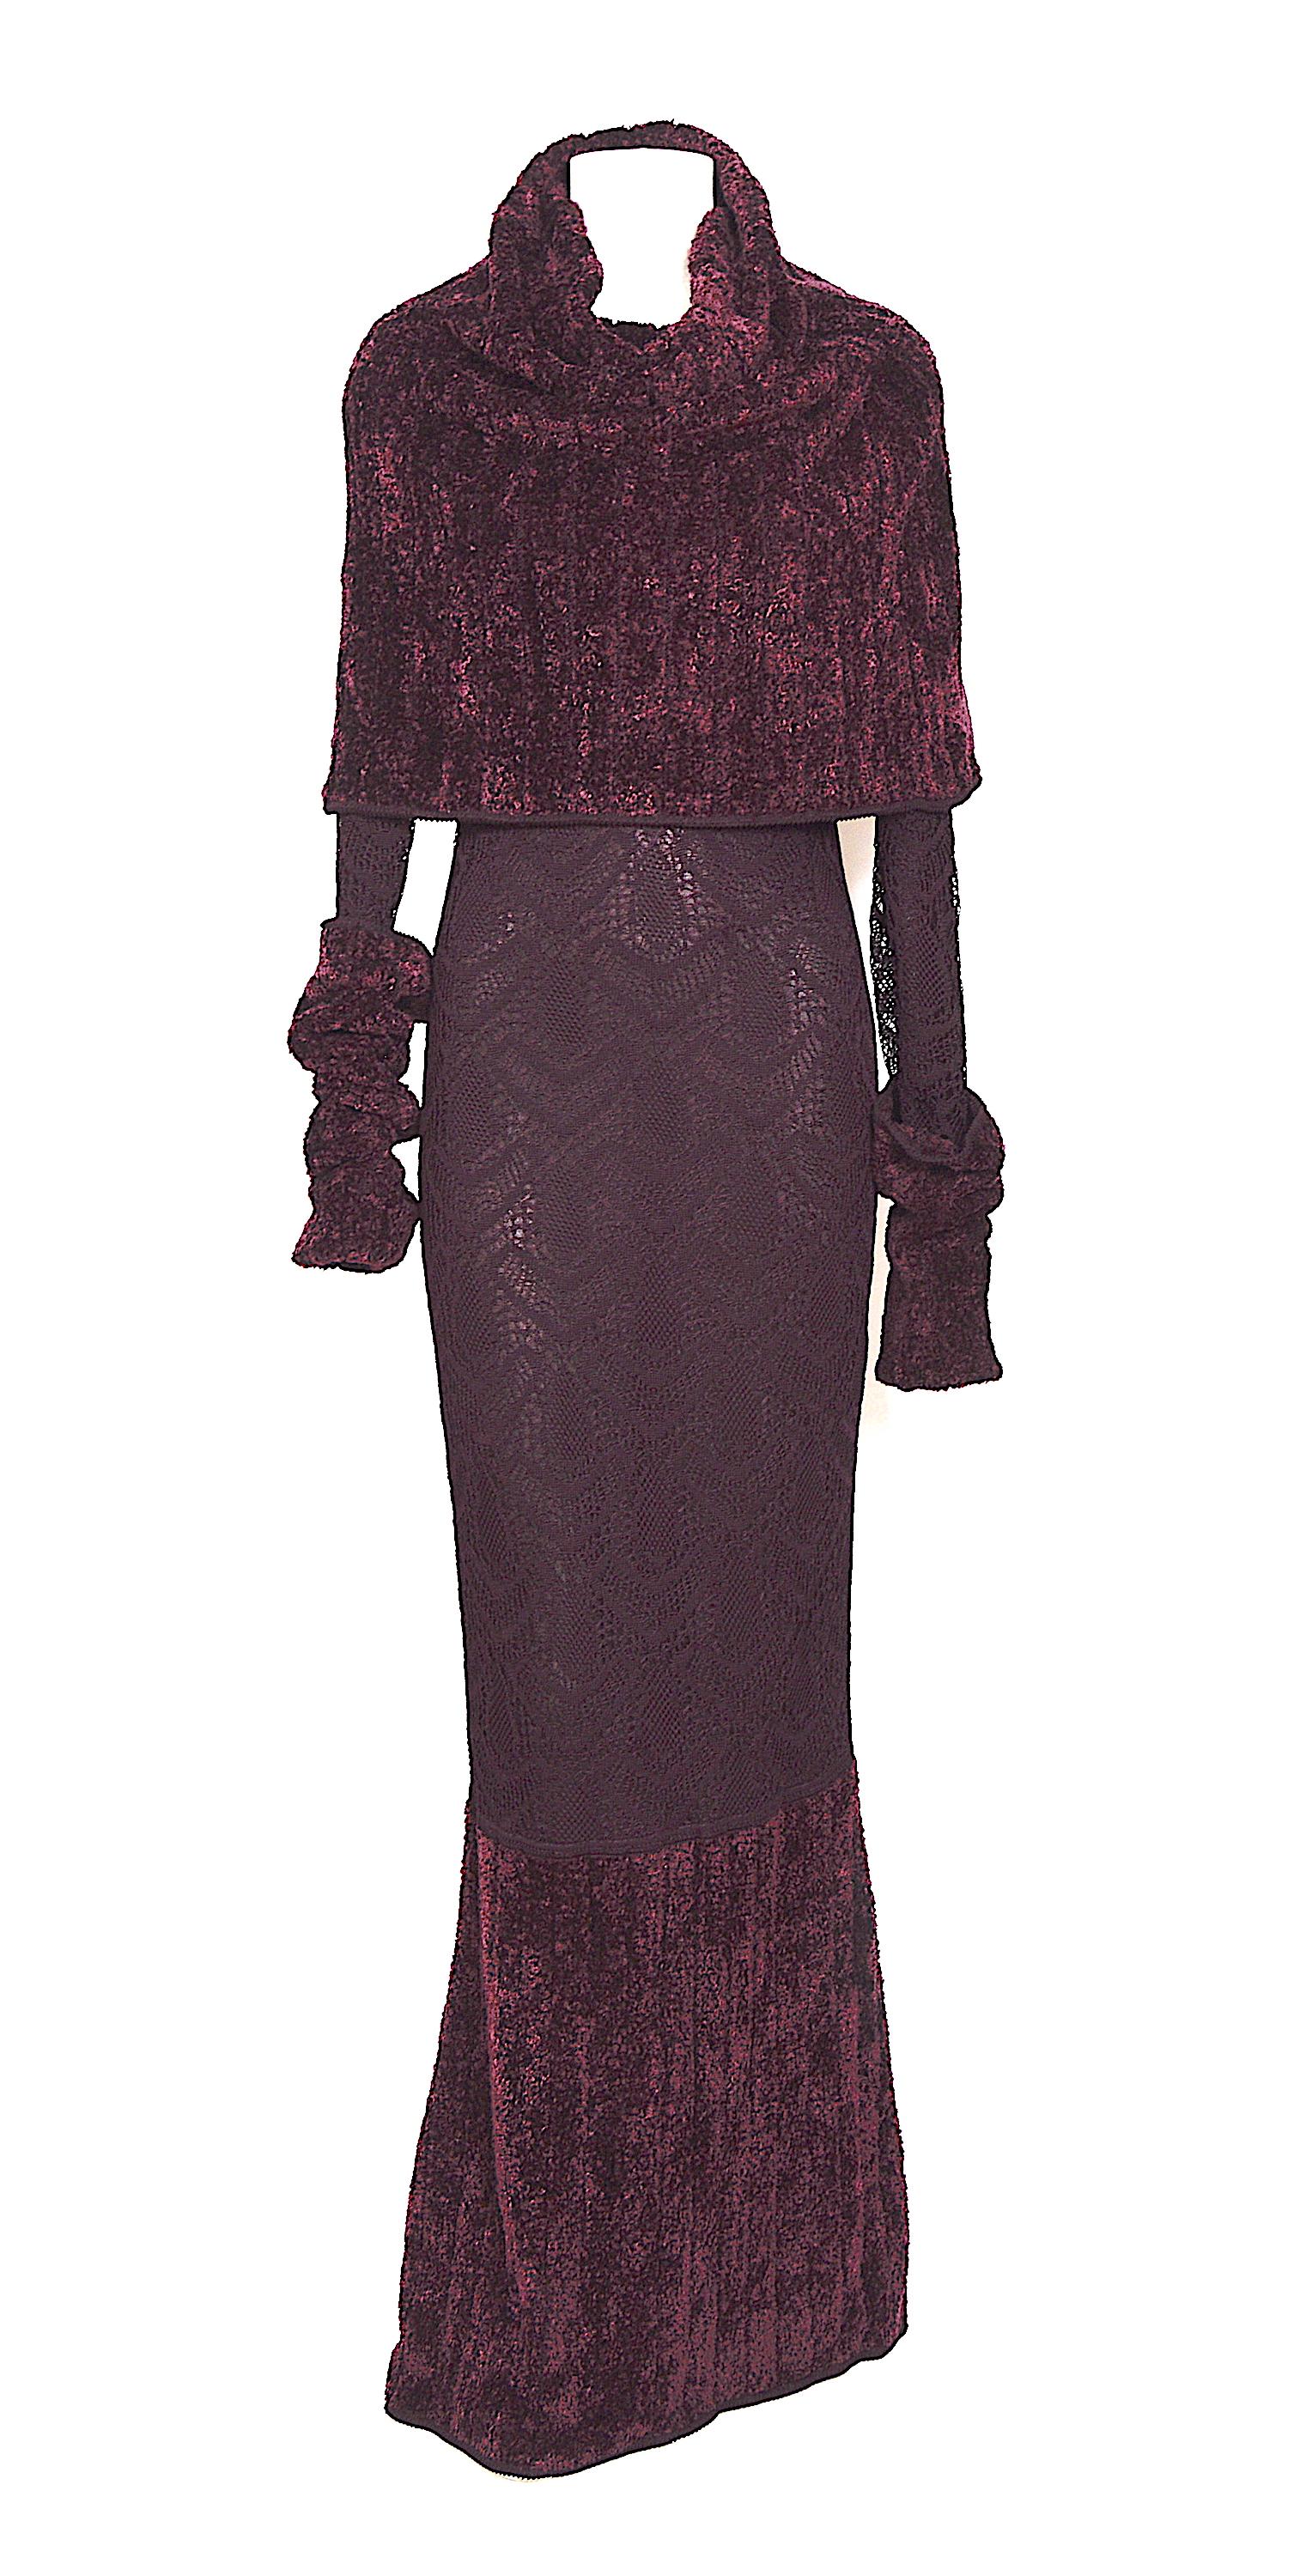 Important collectible John Galliano runway fall 1999 - 2000 knitted and crochet lace viscose and nylon long dress.
Attached oversize collar, capelet, or hoodie if you should desire. 
The dress is absolutely stunning.
Made in Italy - 80%viscose - 20%